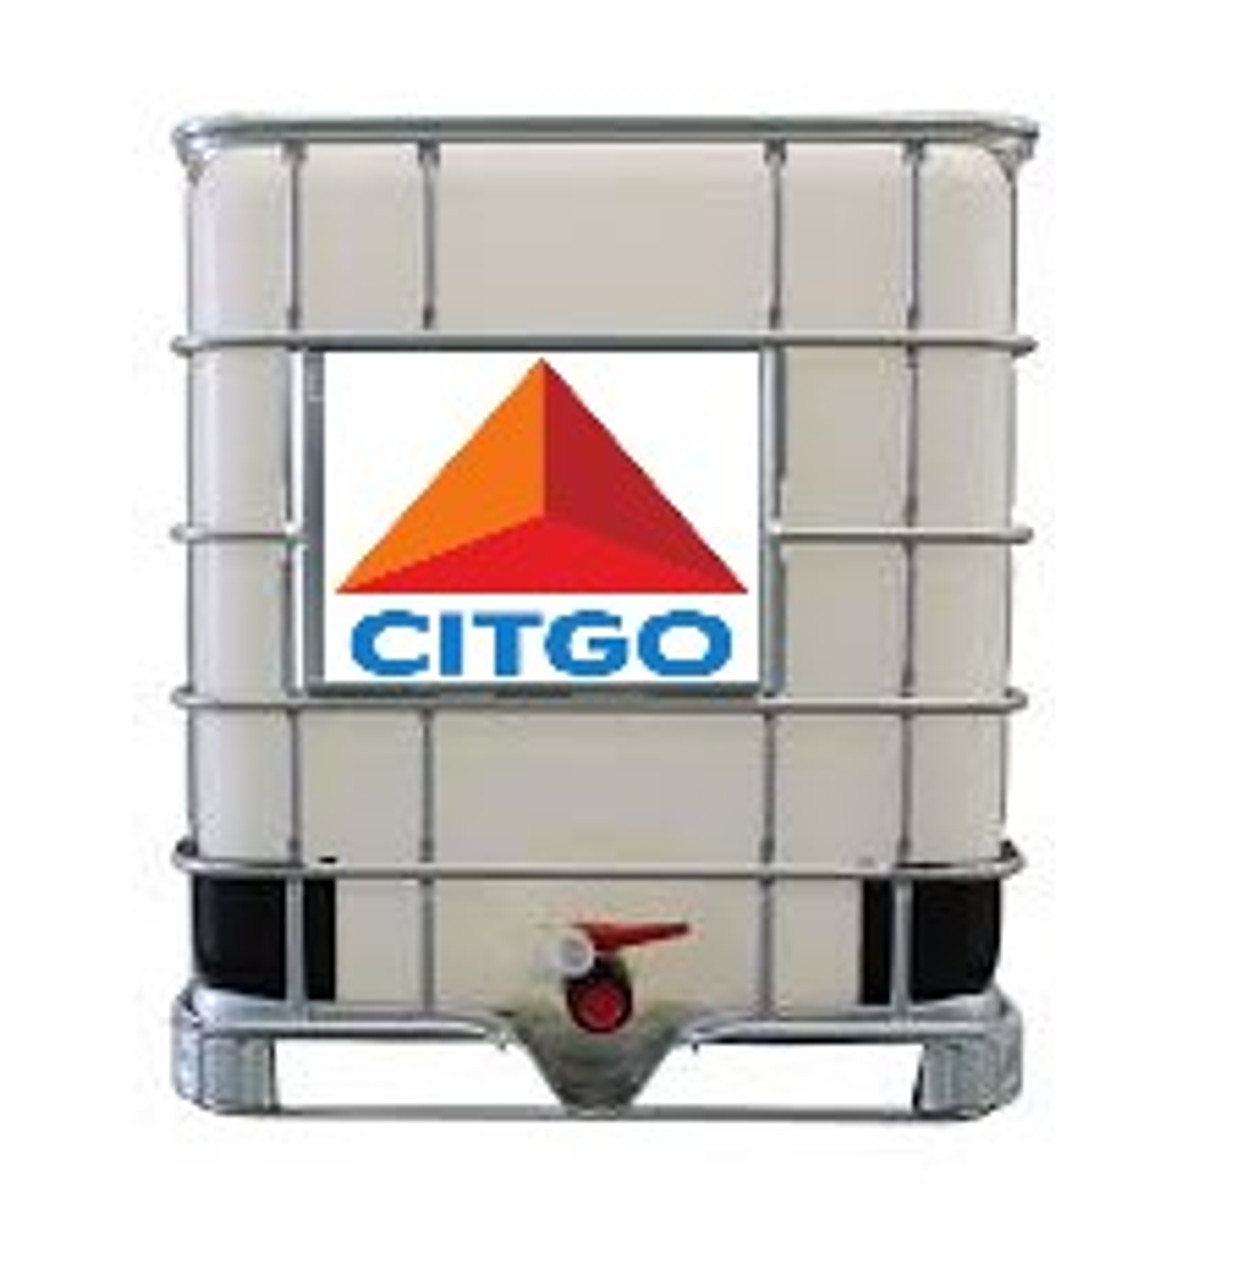 Copy of CITGO Citgard 600 Heavy Duty Engine Oil 10wt - 330 gal Tote